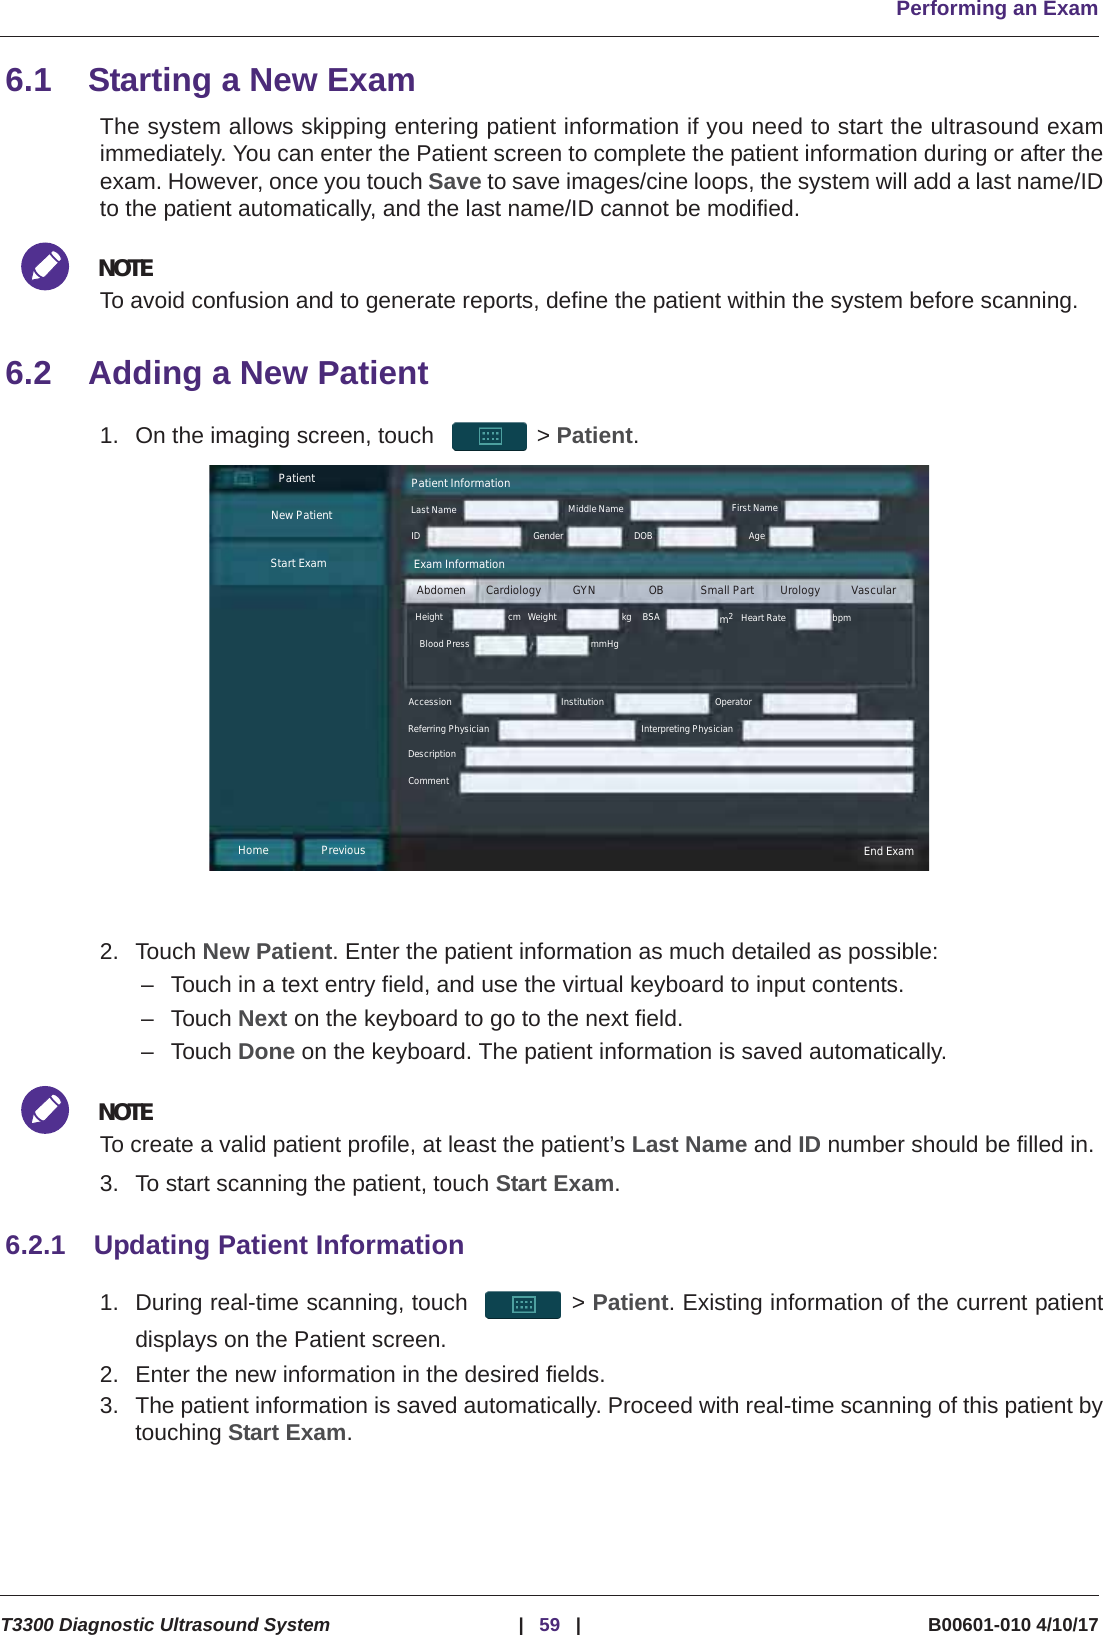 Performing an ExamT3300 Diagnostic Ultrasound System |59 | B00601-010 4/10/176.1 Starting a New ExamThe system allows skipping entering patient information if you need to start the ultrasound examimmediately. You can enter the Patient screen to complete the patient information during or after theexam. However, once you touch Save to save images/cine loops, the system will add a last name/IDto the patient automatically, and the last name/ID cannot be modified.NOTETo avoid confusion and to generate reports, define the patient within the system before scanning.6.2 Adding a New Patient1. On the imaging screen, touch  &gt; Patient.2. Touch New Patient. Enter the patient information as much detailed as possible:– Touch in a text entry field, and use the virtual keyboard to input contents.–Touch Next on the keyboard to go to the next field.–Touch Done on the keyboard. The patient information is saved automatically.NOTETo create a valid patient profile, at least the patient’s Last Name and ID number should be filled in.3. To start scanning the patient, touch Start Exam.6.2.1 Updating Patient Information1. During real-time scanning, touch  &gt; Patient. Existing information of the current patientdisplays on the Patient screen.2. Enter the new information in the desired fields.3. The patient information is saved automatically. Proceed with real-time scanning of this patient bytouching Start Exam.PatientNew PatientStart ExamPatient InformationLast Name Middle Name First NameID Gender DOB AgeAbdomen Cardiology GYN OB Small Part Urology VascularHeight Weight BSAExam InformationHeart Rate bpmkgmmHgBlood Presscm m2Accession Institution OperatorReferring Physician Interpreting PhysicianDescriptionCommentHome Previous End Exam